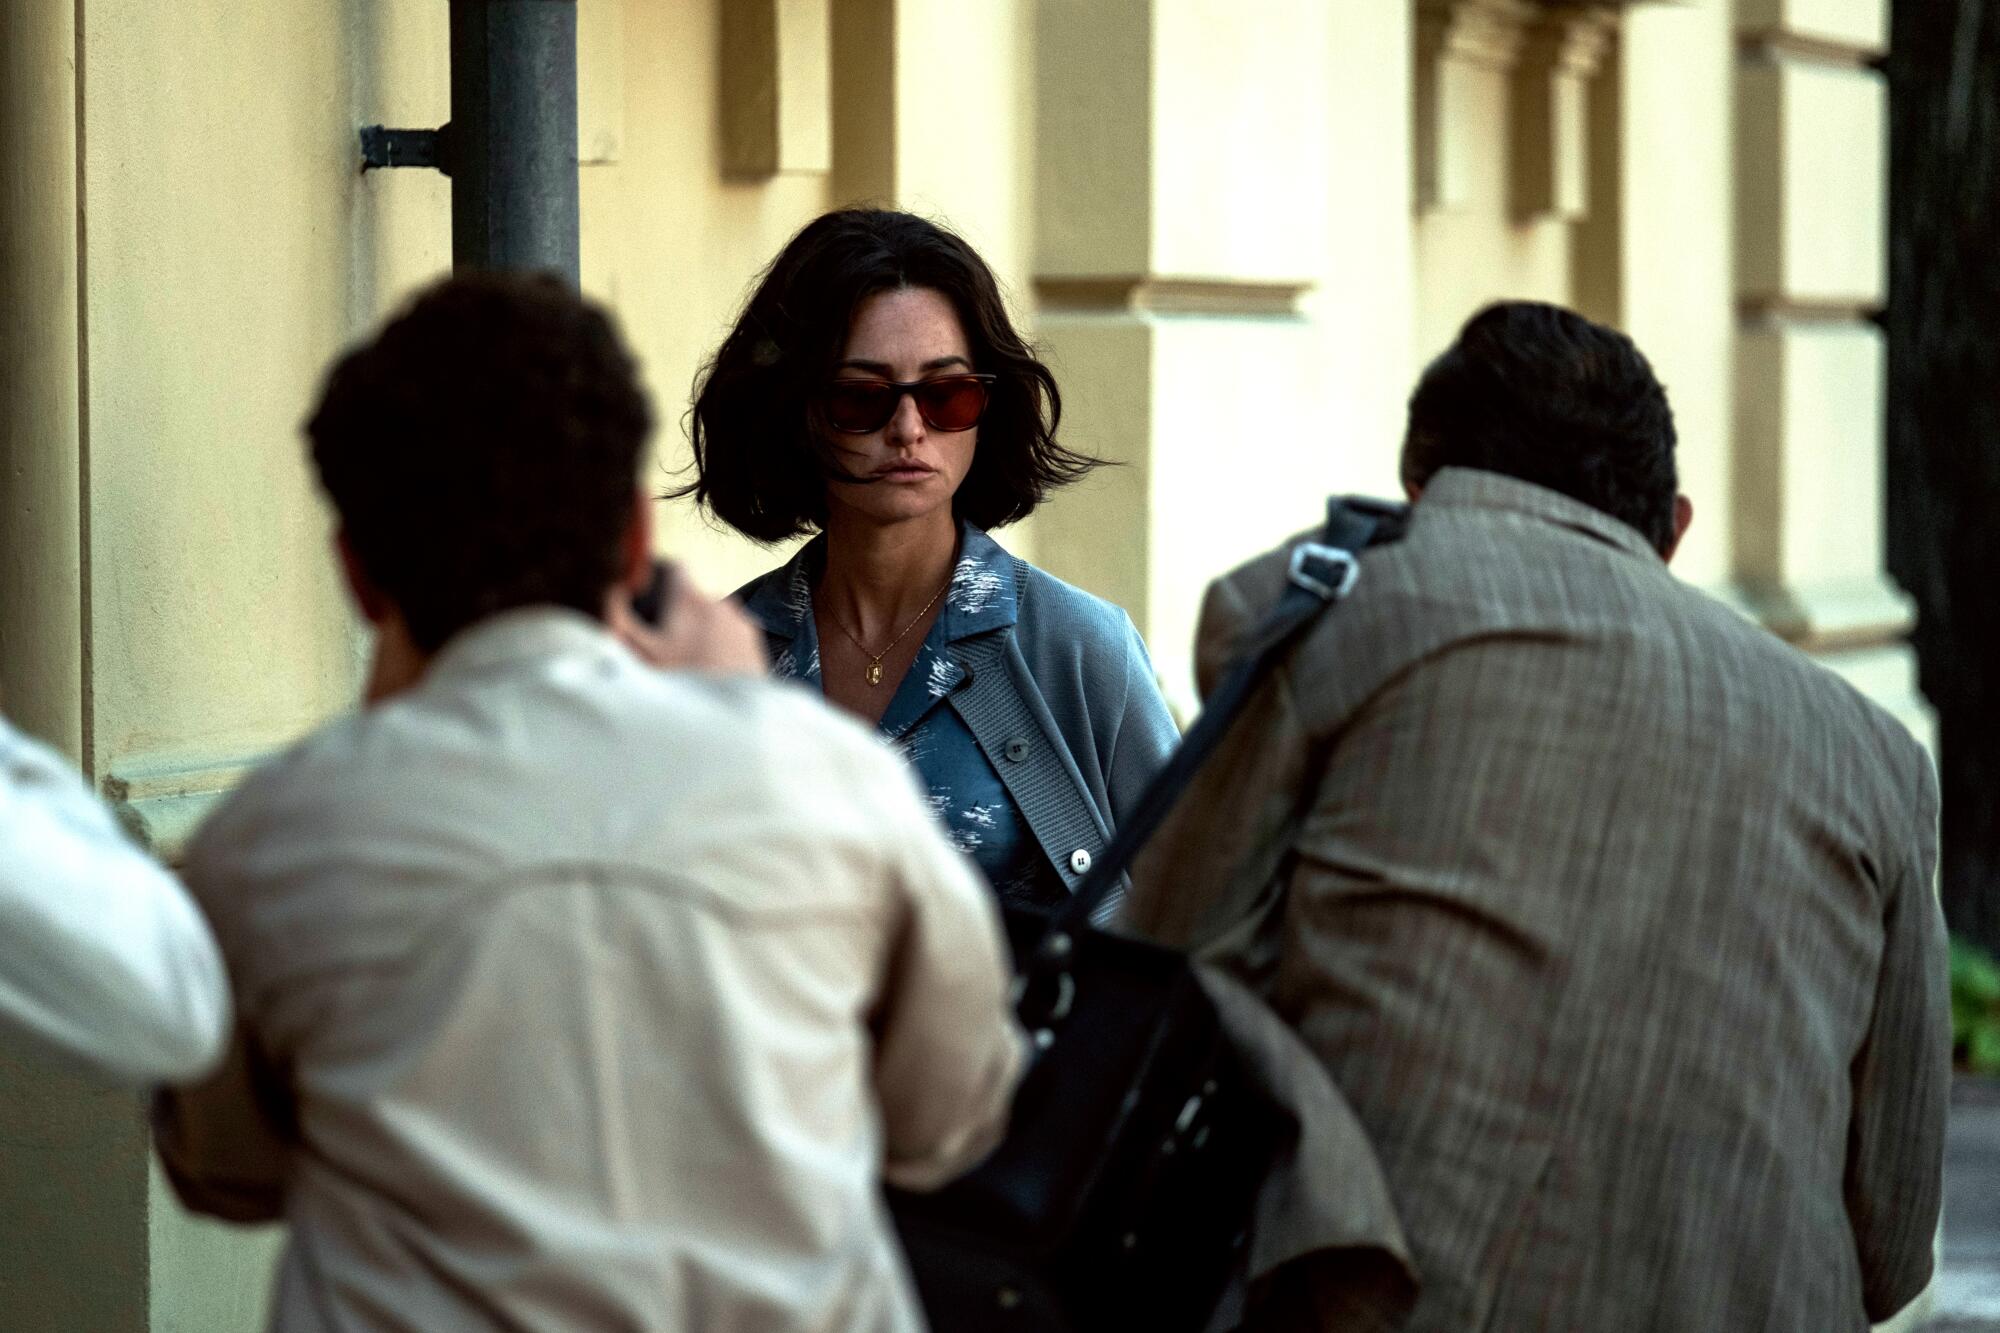 A woman in shades is photographed by paparazzi.